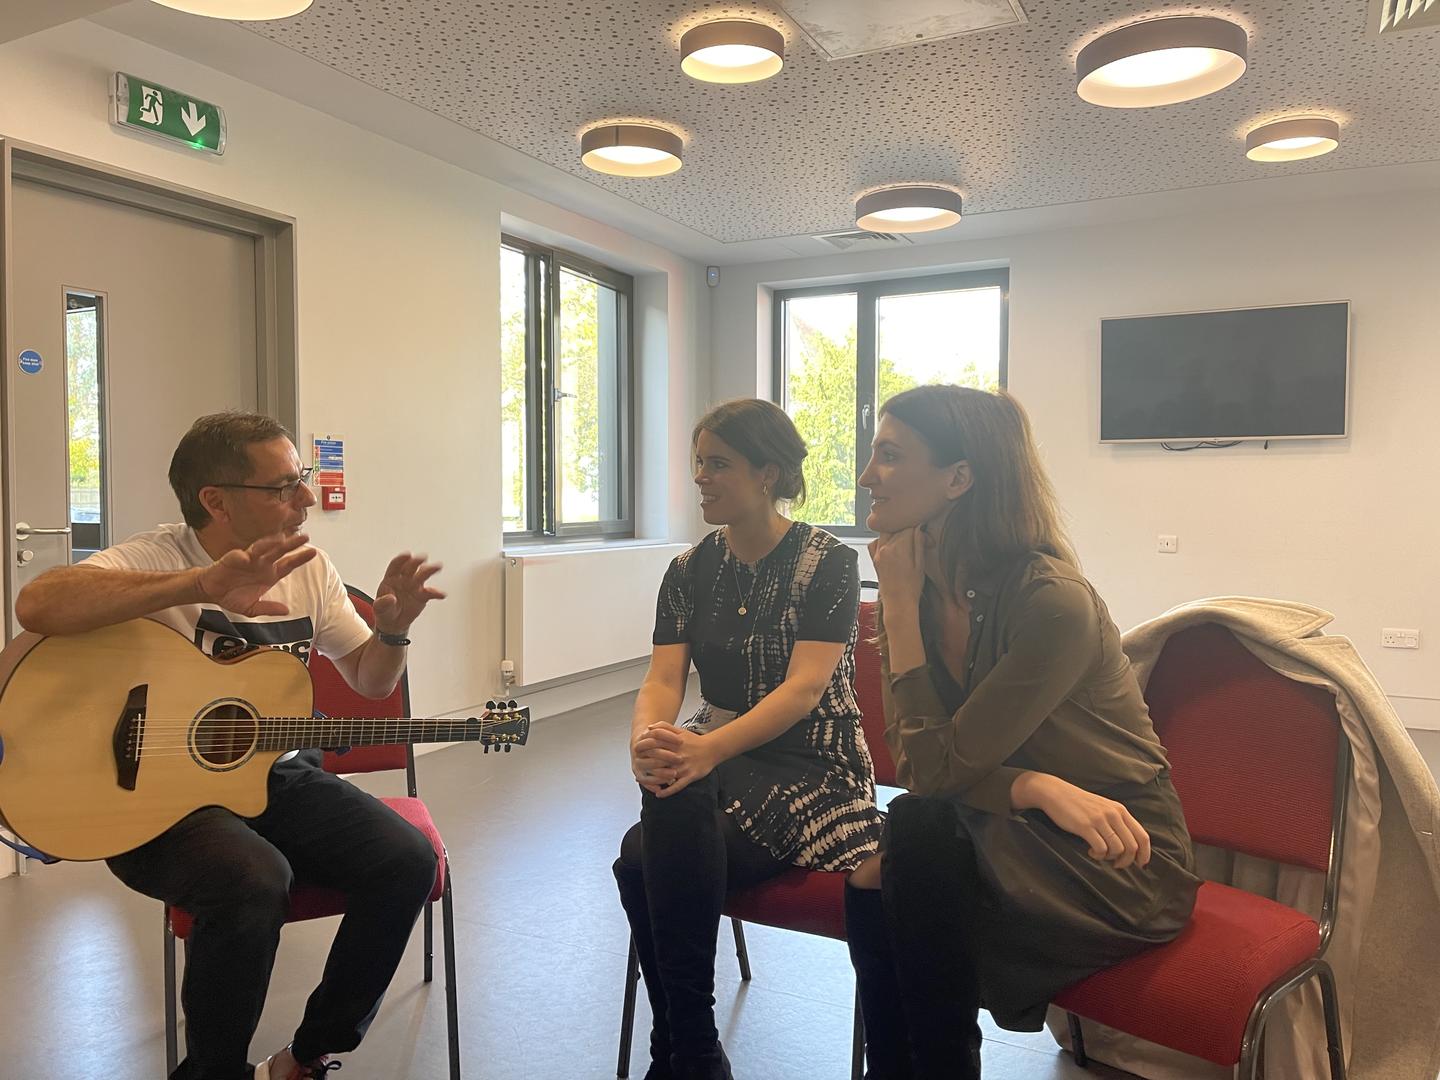 HRH Princess Eugenie and Julia de Boinville, Co-Founders of The Anti-Slavery Collective speak to specialist support worker Nigel Long, who holds a guitar.